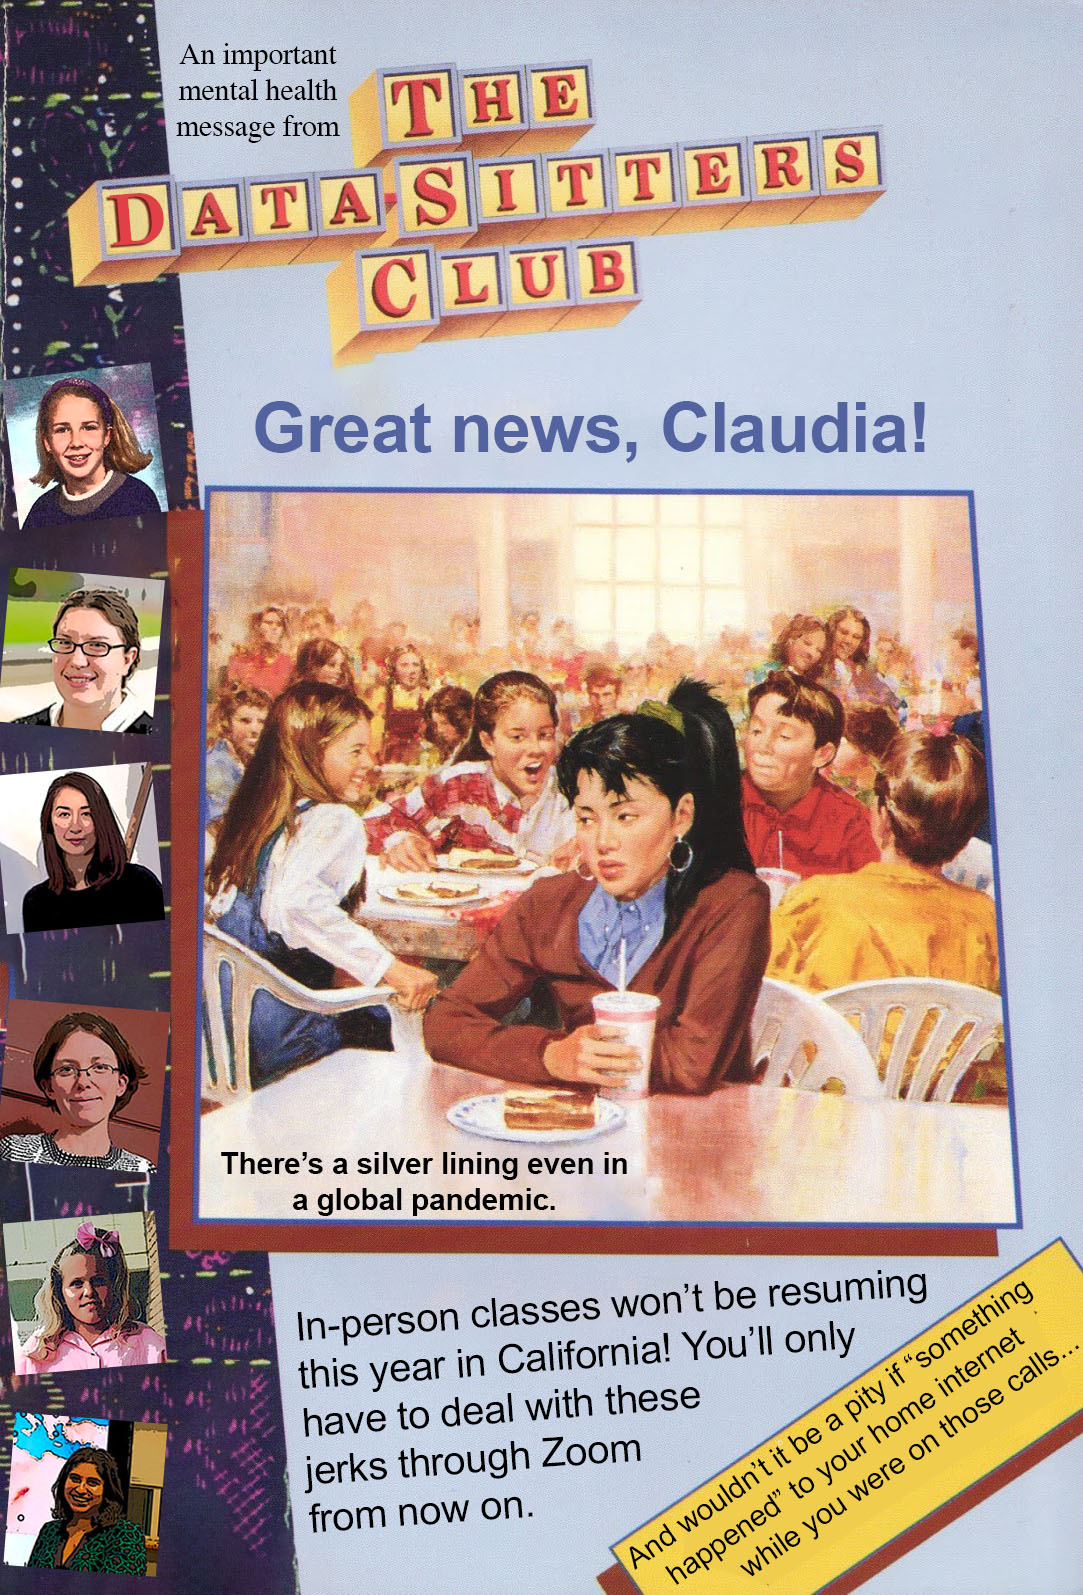 California schools are out for the year and it's good news for Claudia!